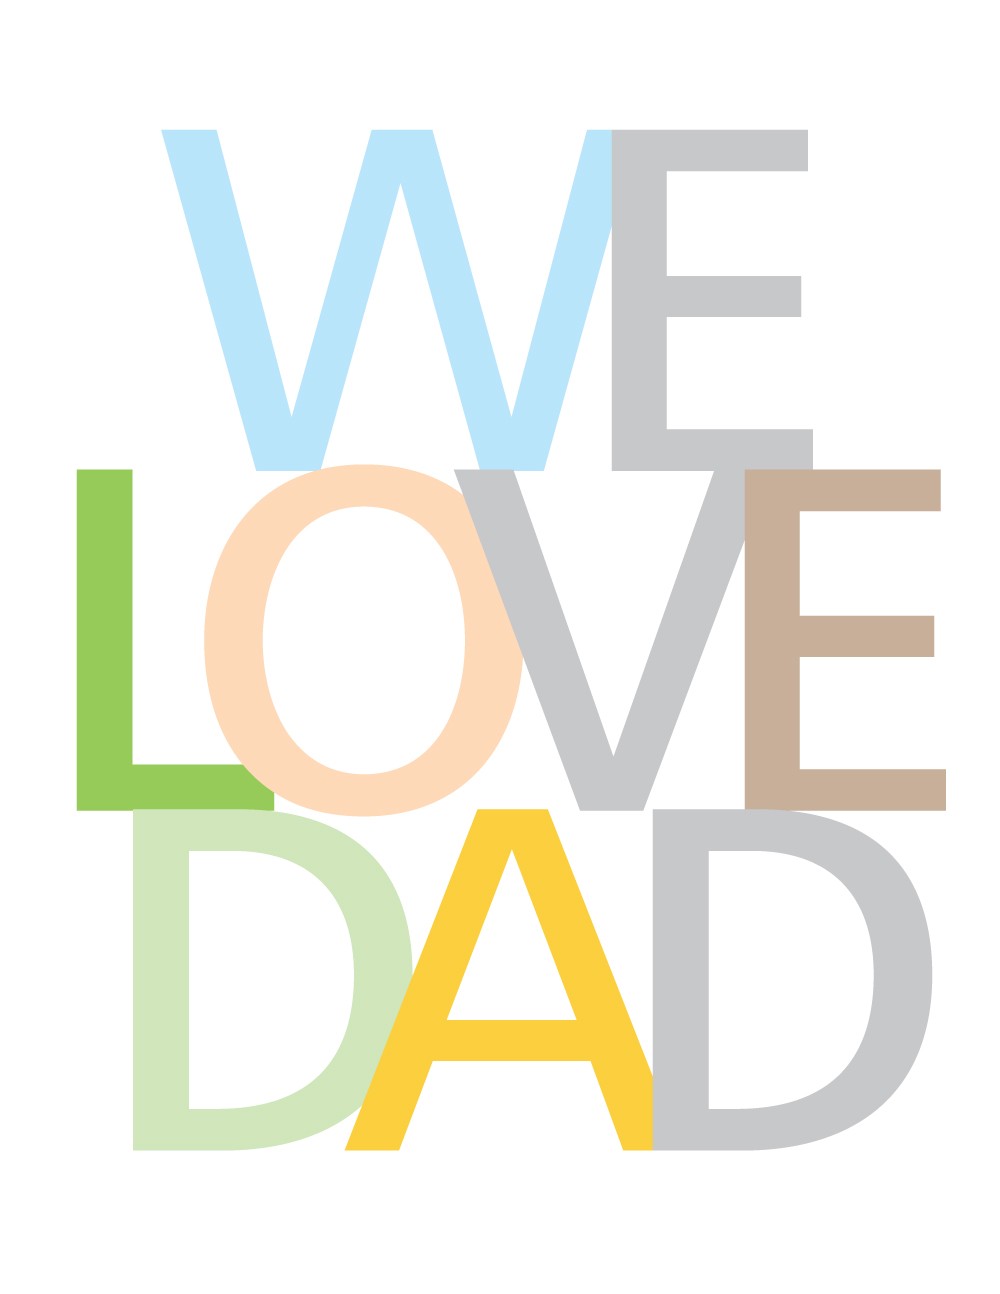 Wallpaper Ive Dad Is Greetings Saying Seen Thanks Tell Its The